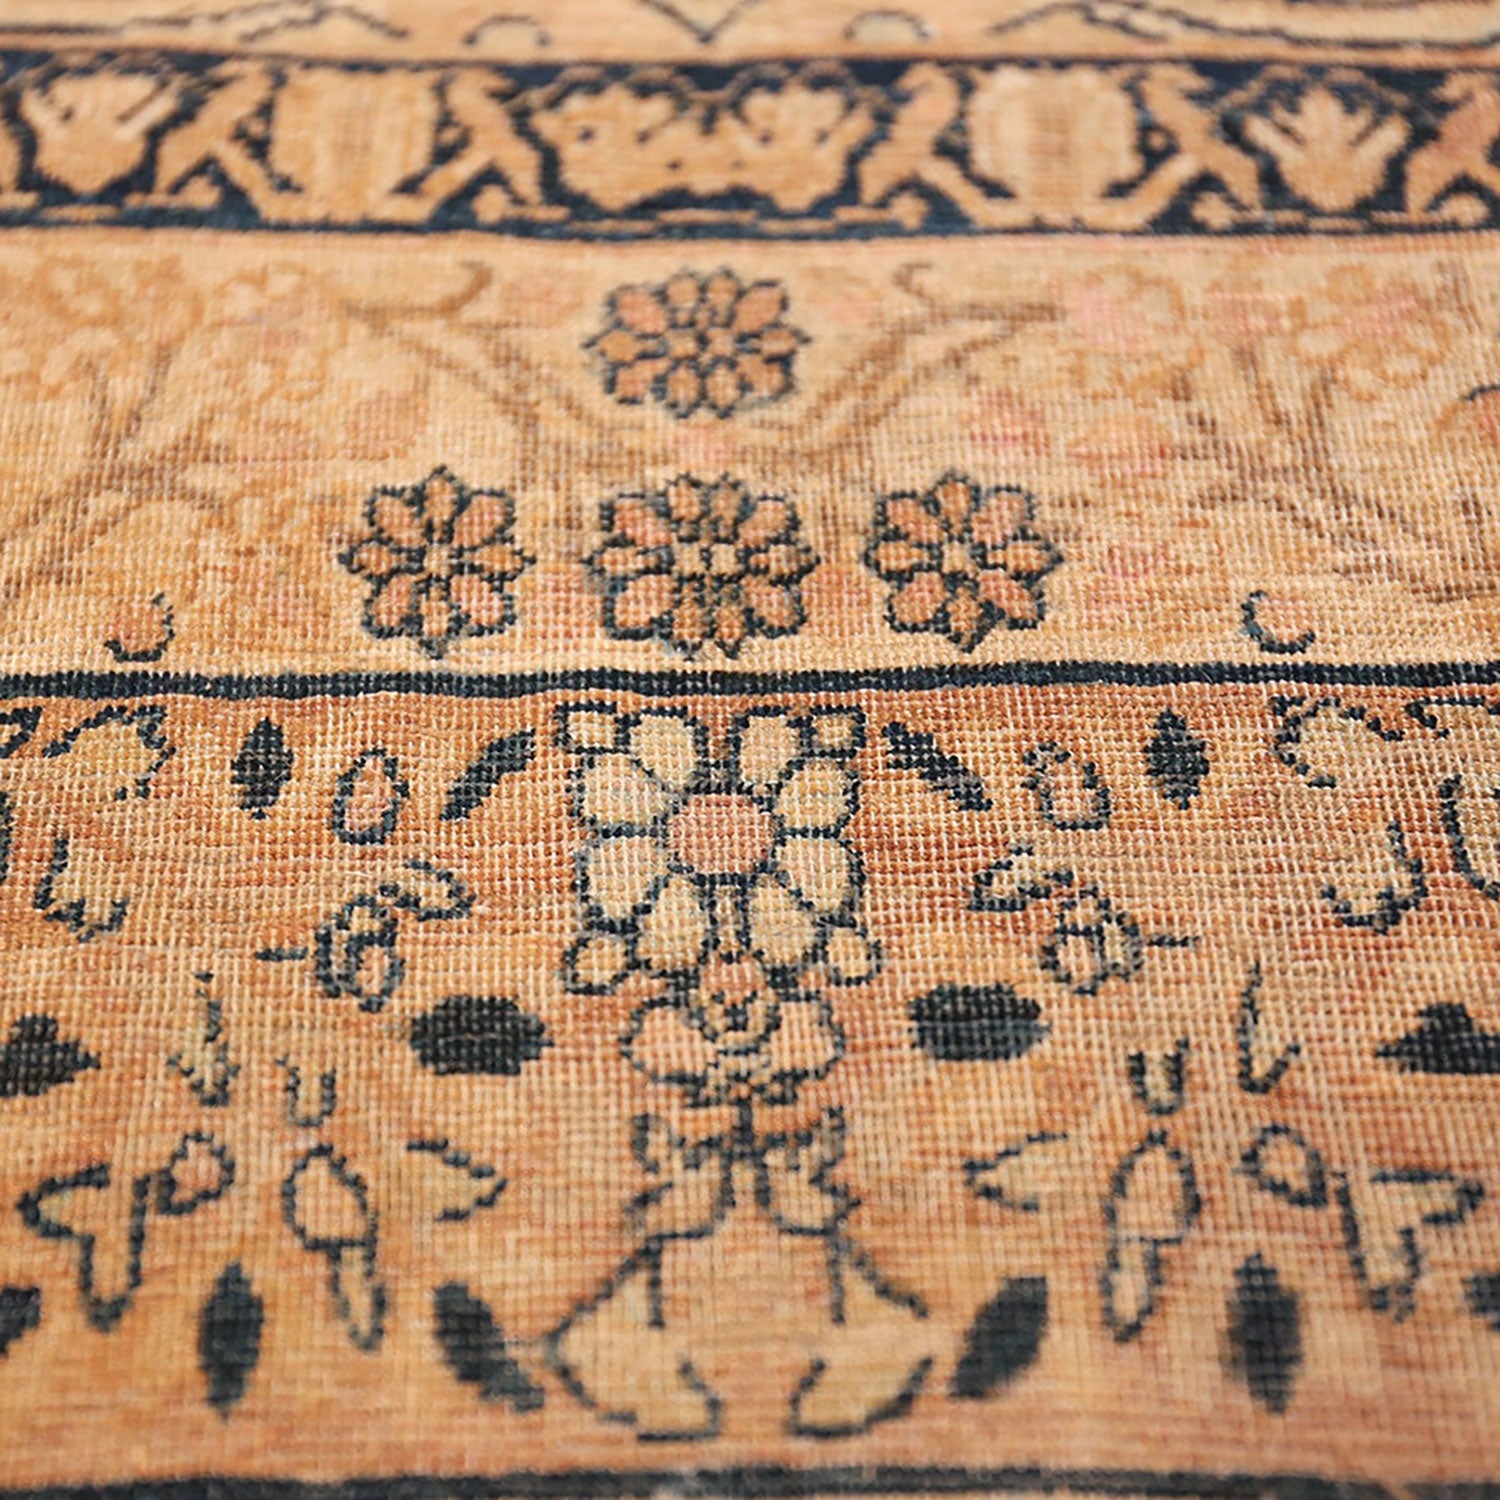 Intricate traditional rug with floral motifs and Persian/Oriental influences.